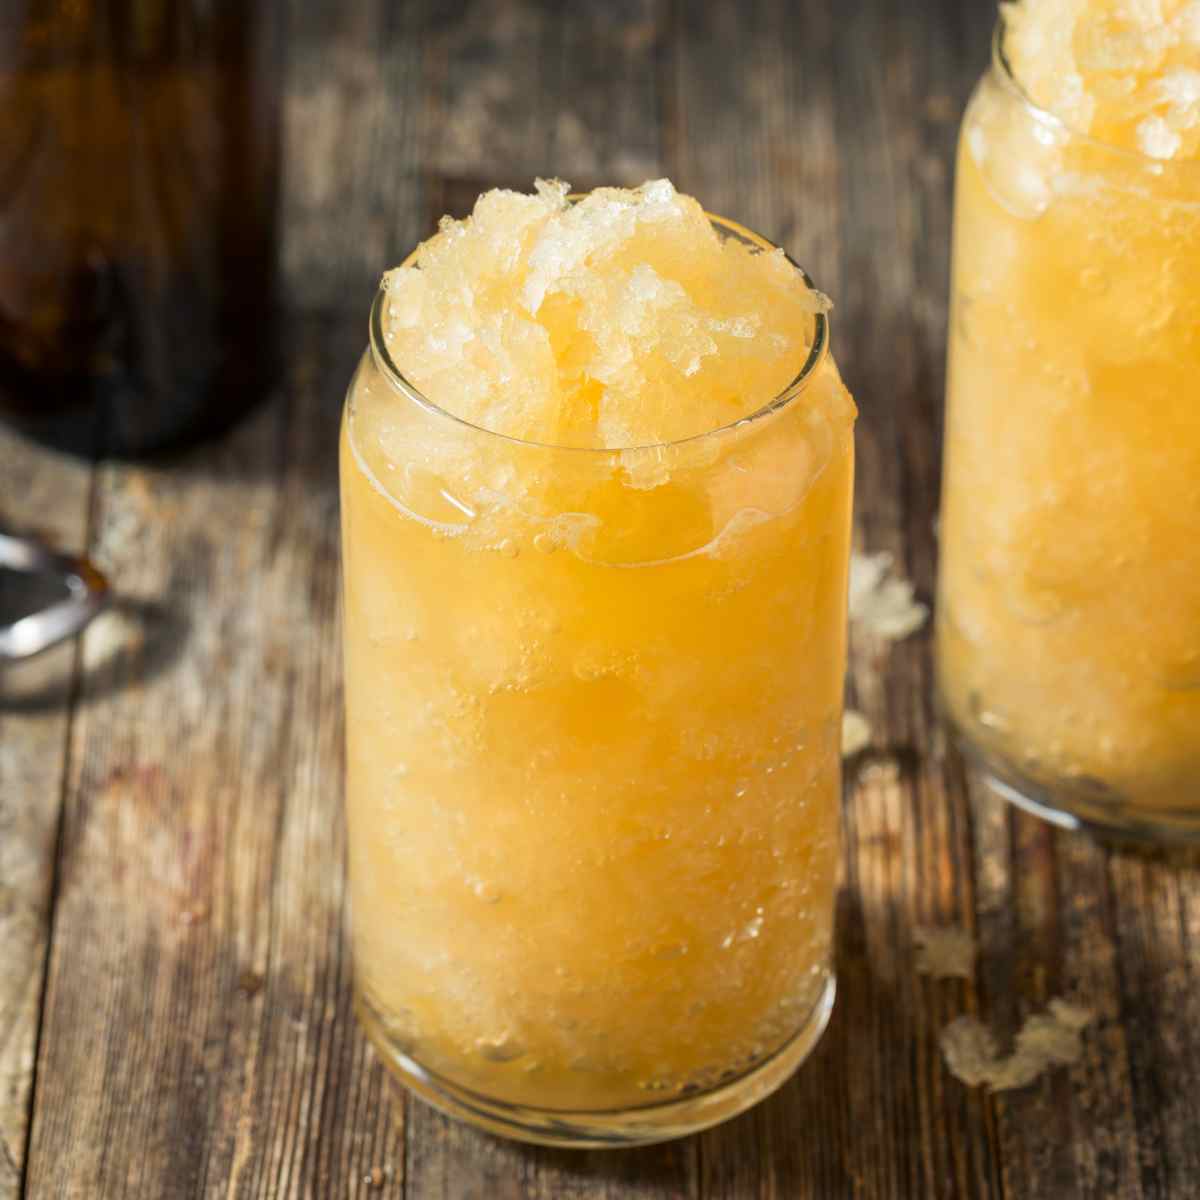 Two Jelly Beer / Beer Slushies on table